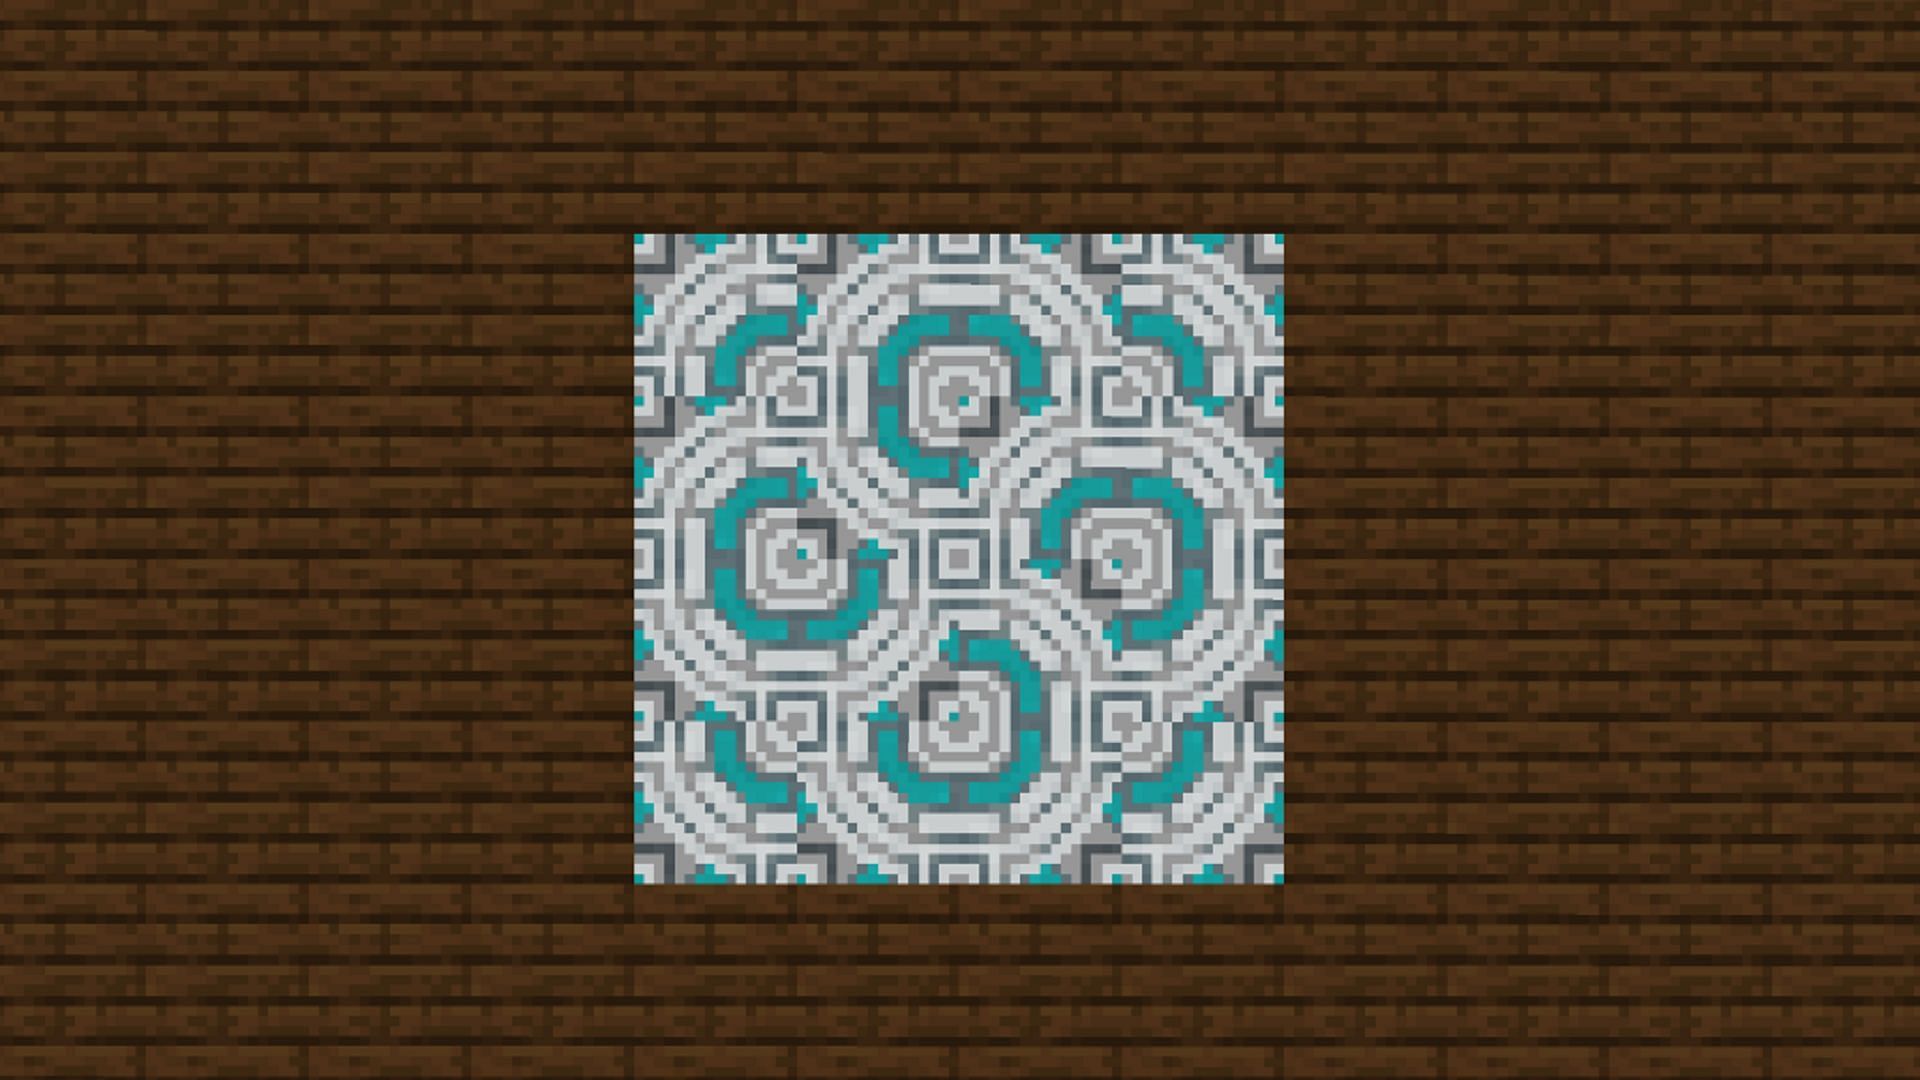 Glazed terracotta can be one of the finest pattern additions when decorating (Image via Minecraftfurniture.net)